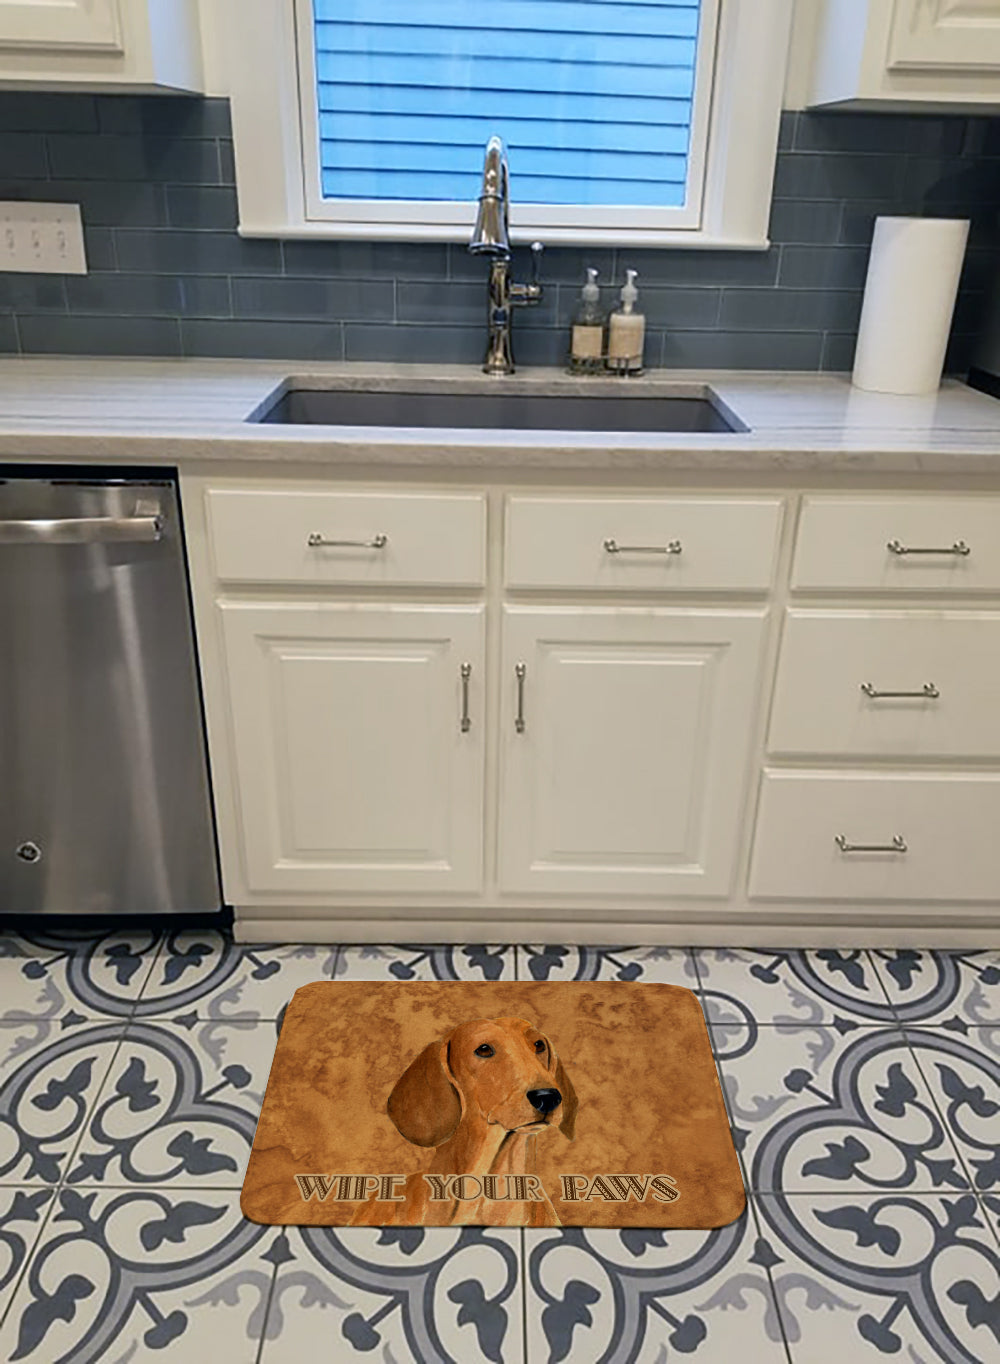 Red Dachshund Wipe your Paws Machine Washable Memory Foam Mat SS4895RUG - the-store.com